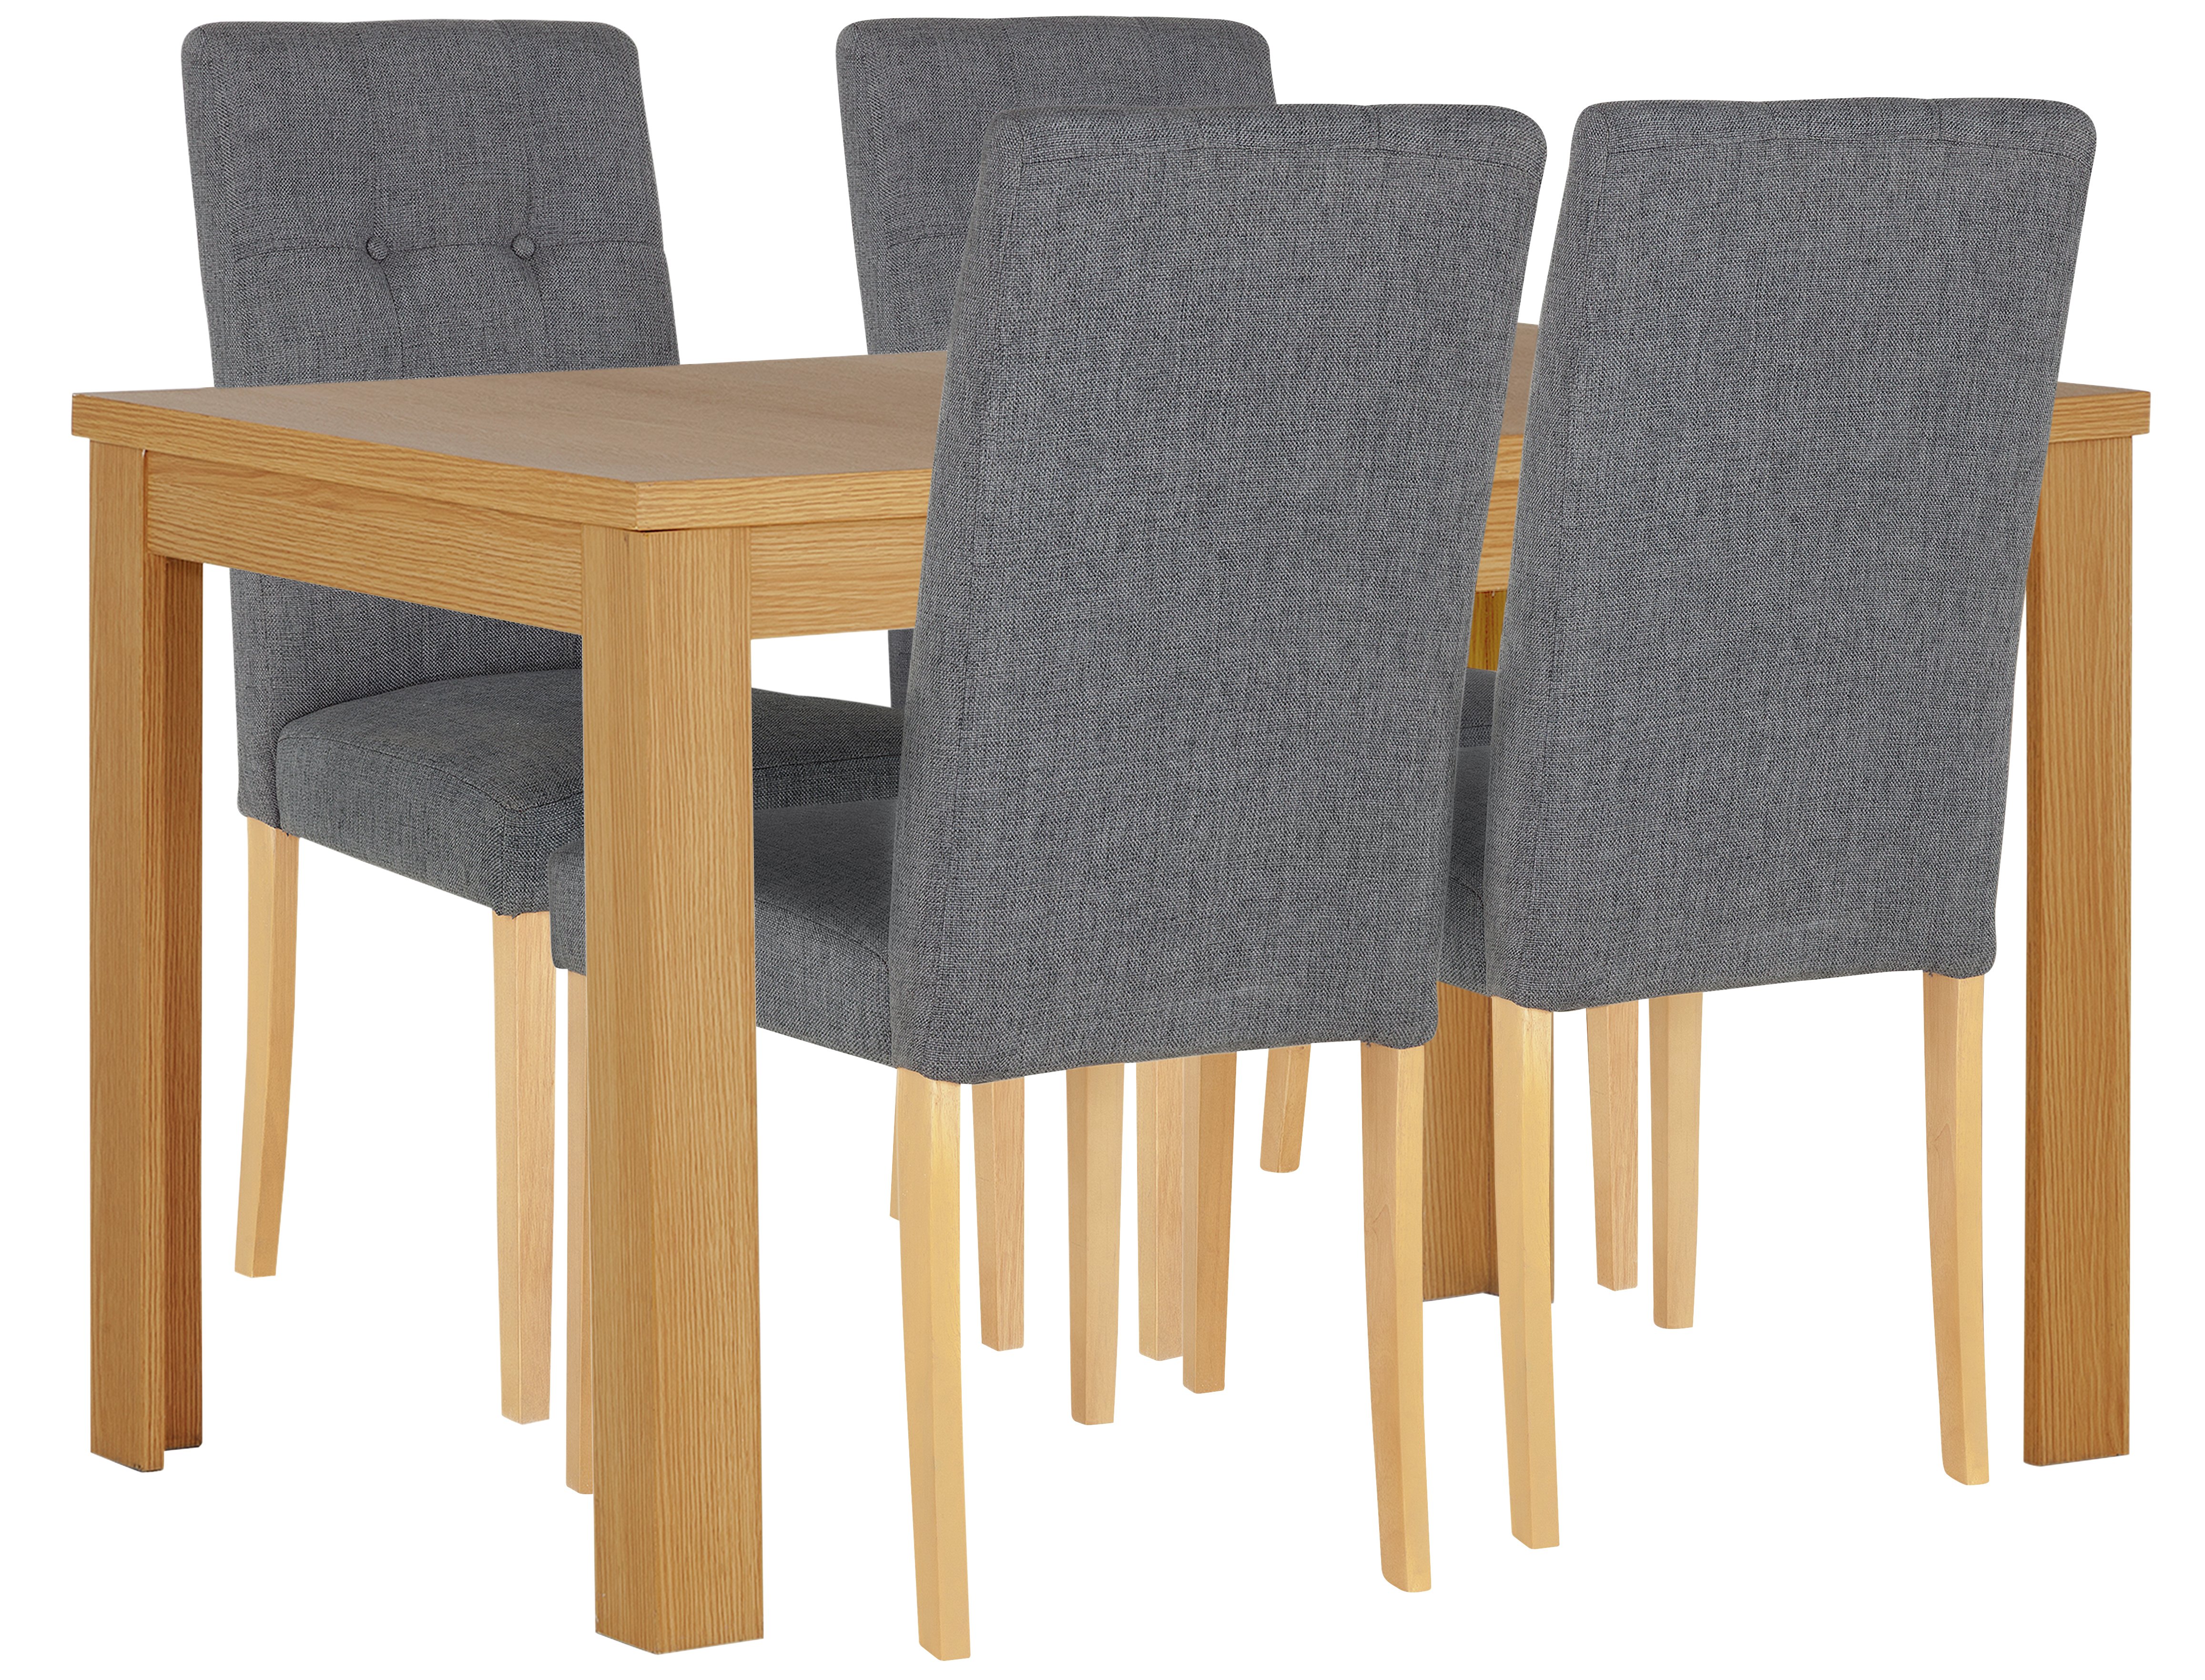 Collection Adaline Ext Dining Table & 4 Chairs - Oak Effect. Review